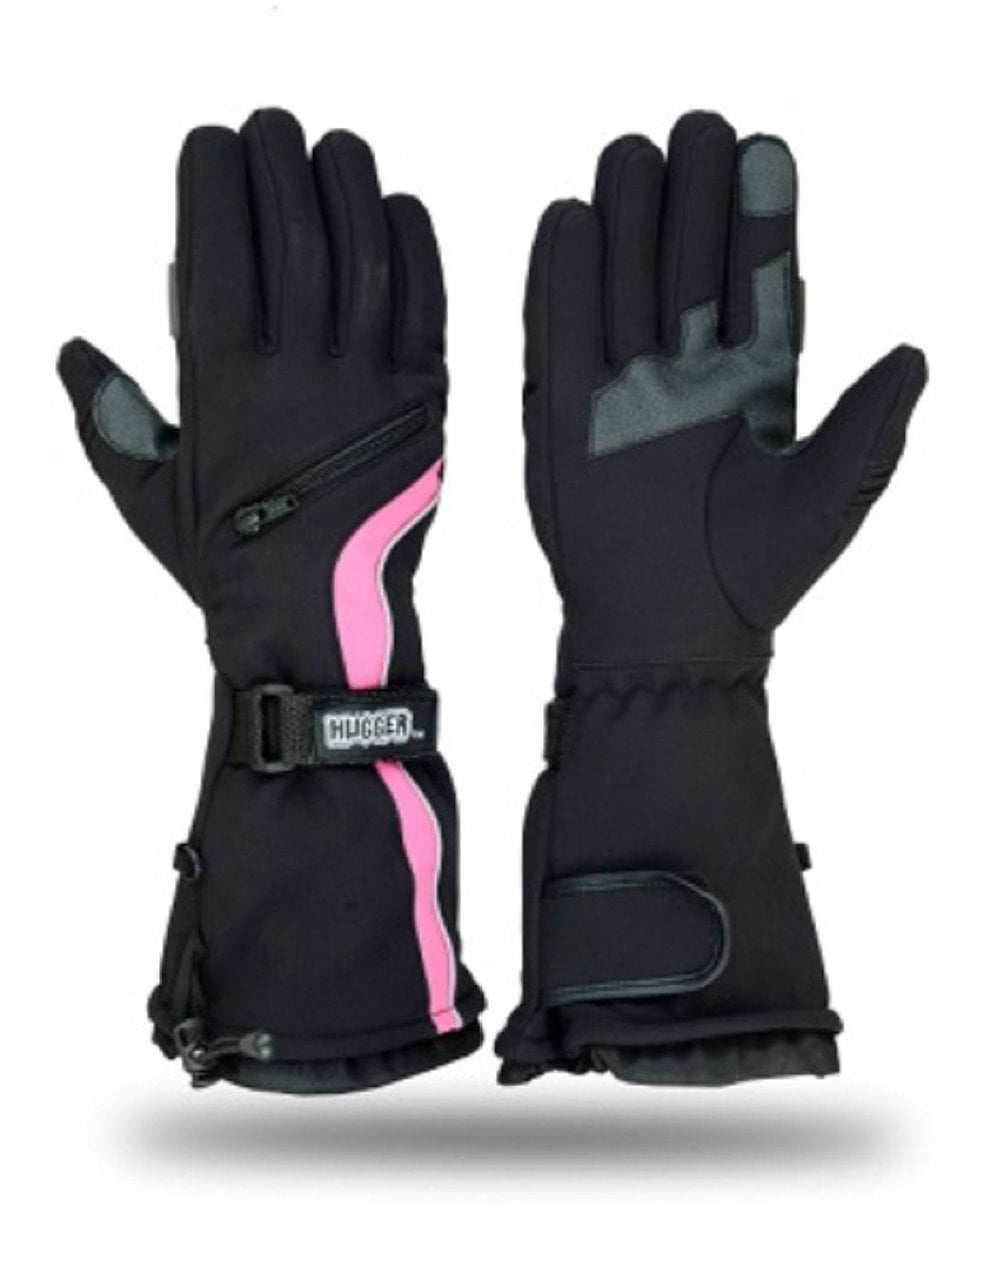 Hugger women's Textile Guantlet Snowmobile Gloves Ski Driving Winter Riding Hand Protection